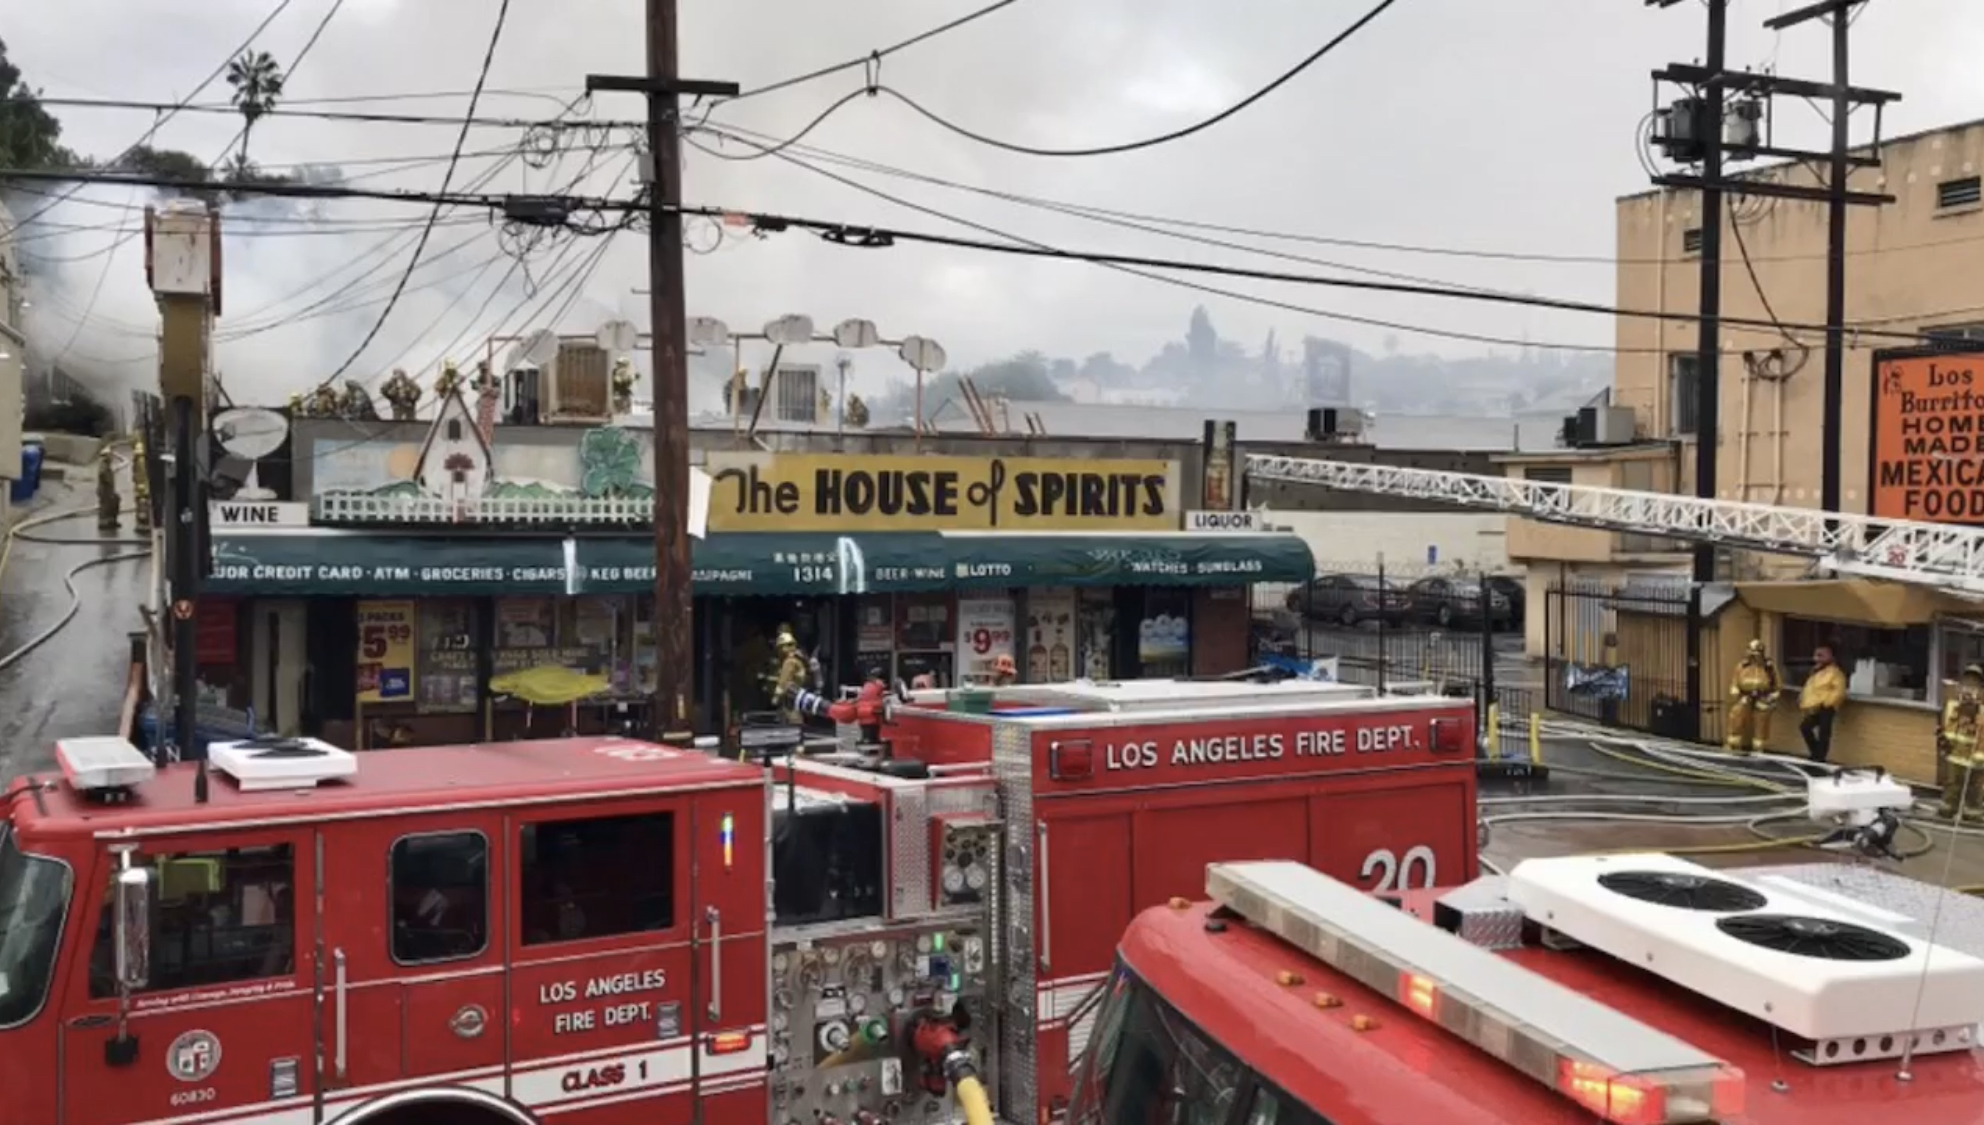 Firefighters Extinguish a Greater Alarm Fire in Echo Park